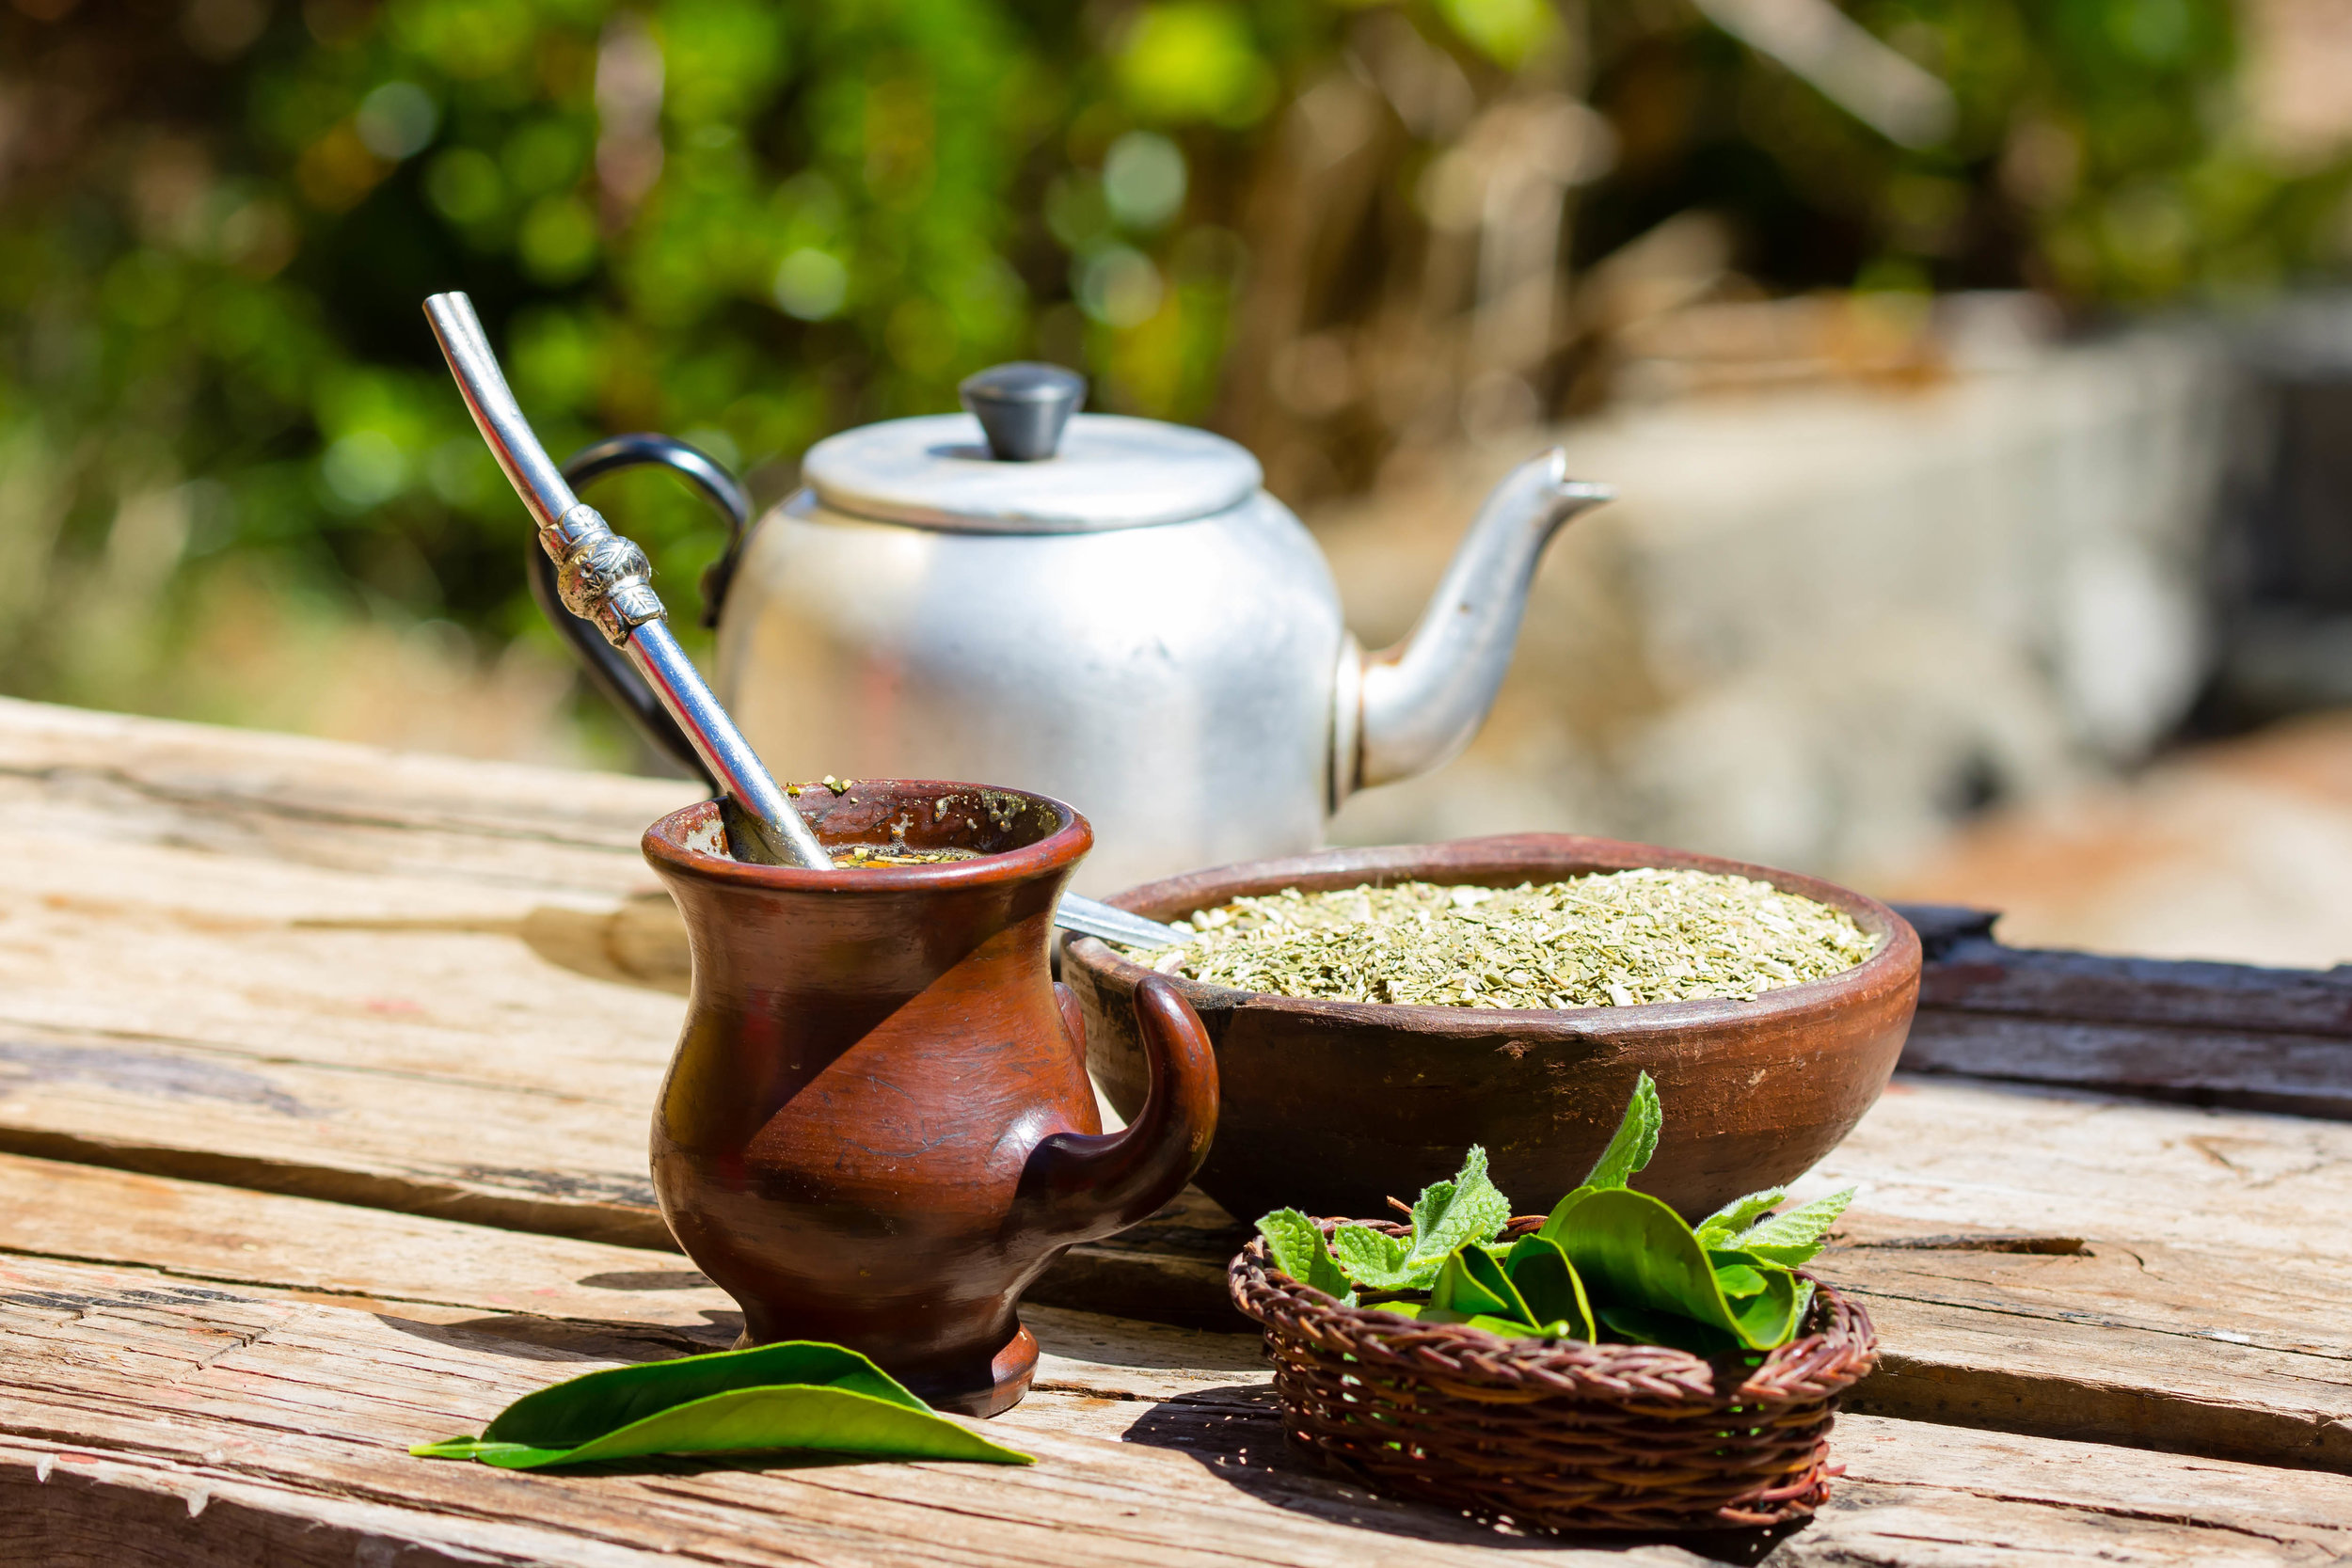 mate set on table with mate leaves.jpg